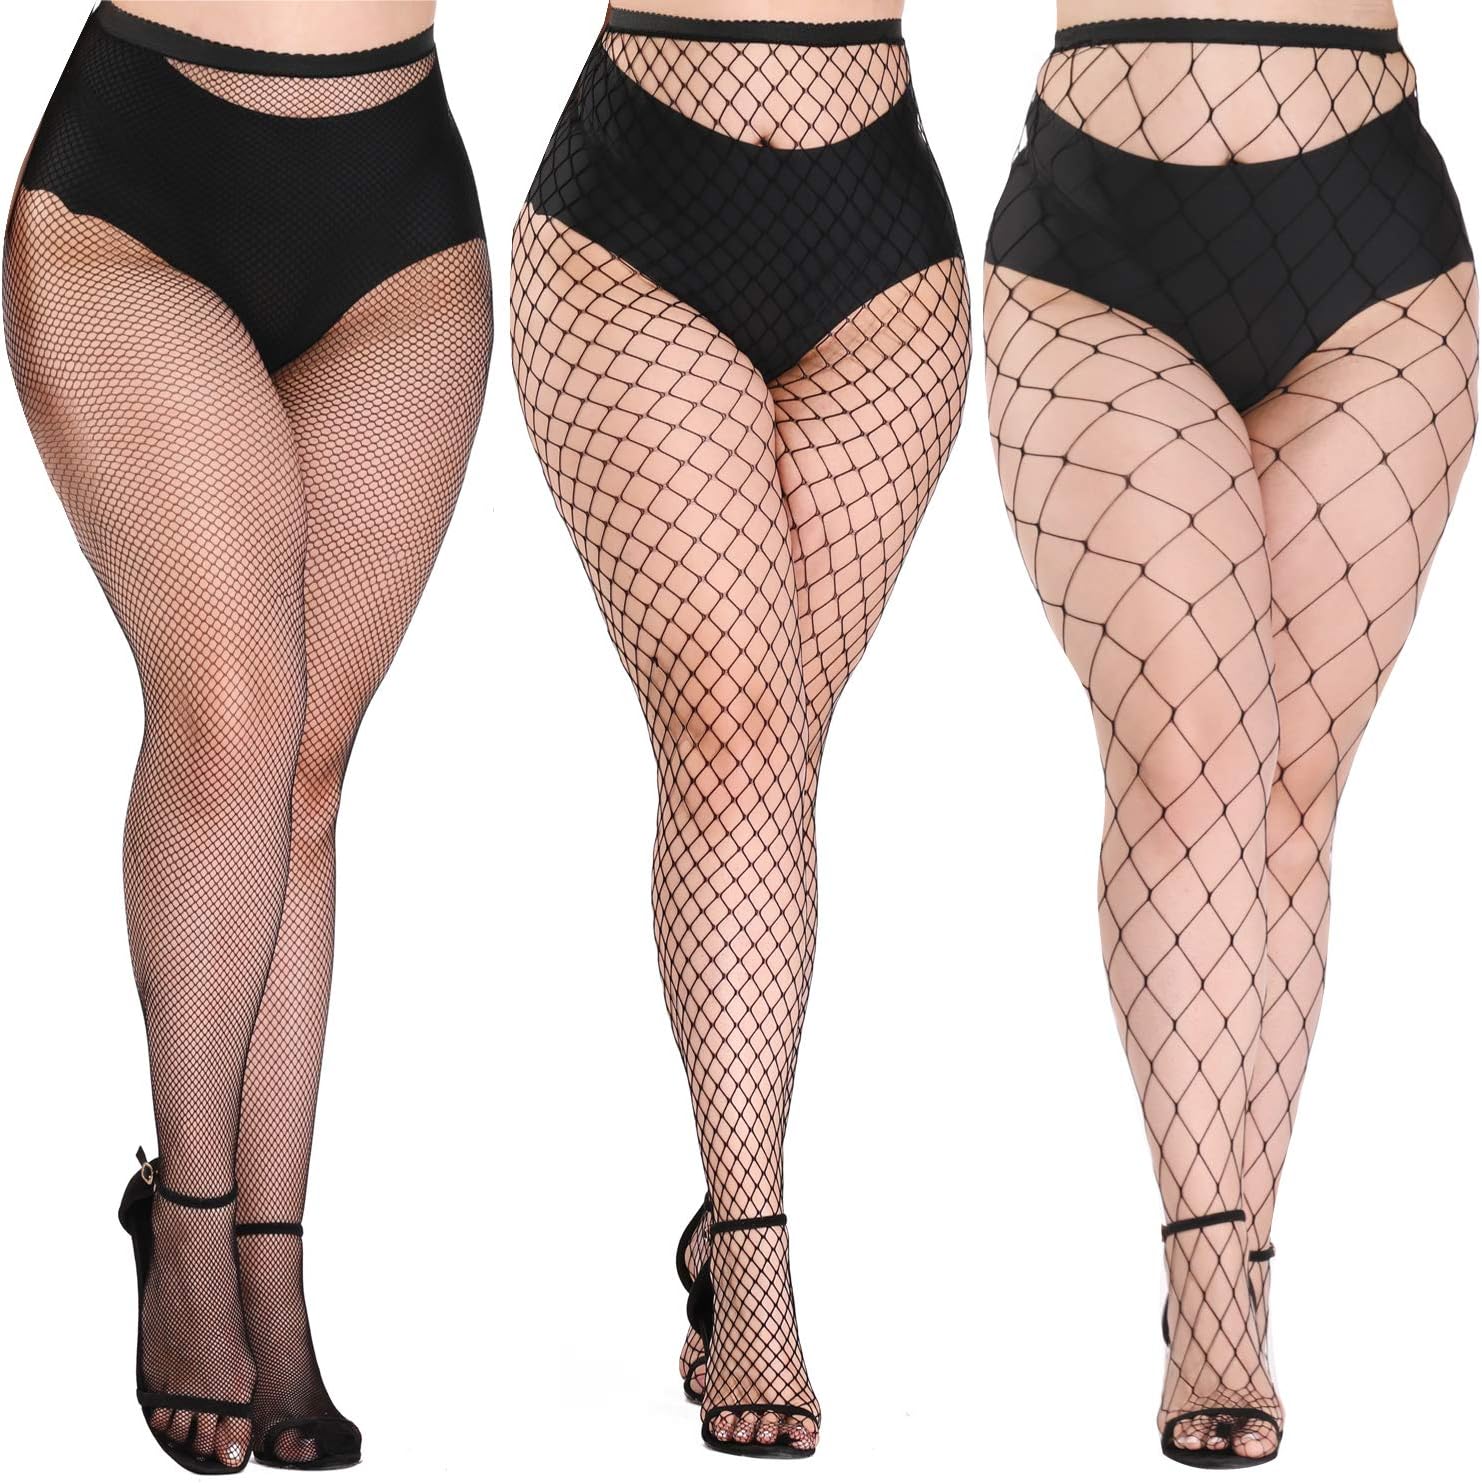 Akiido Fishnet Stockings: The Perfect Blend of Style and Comfort